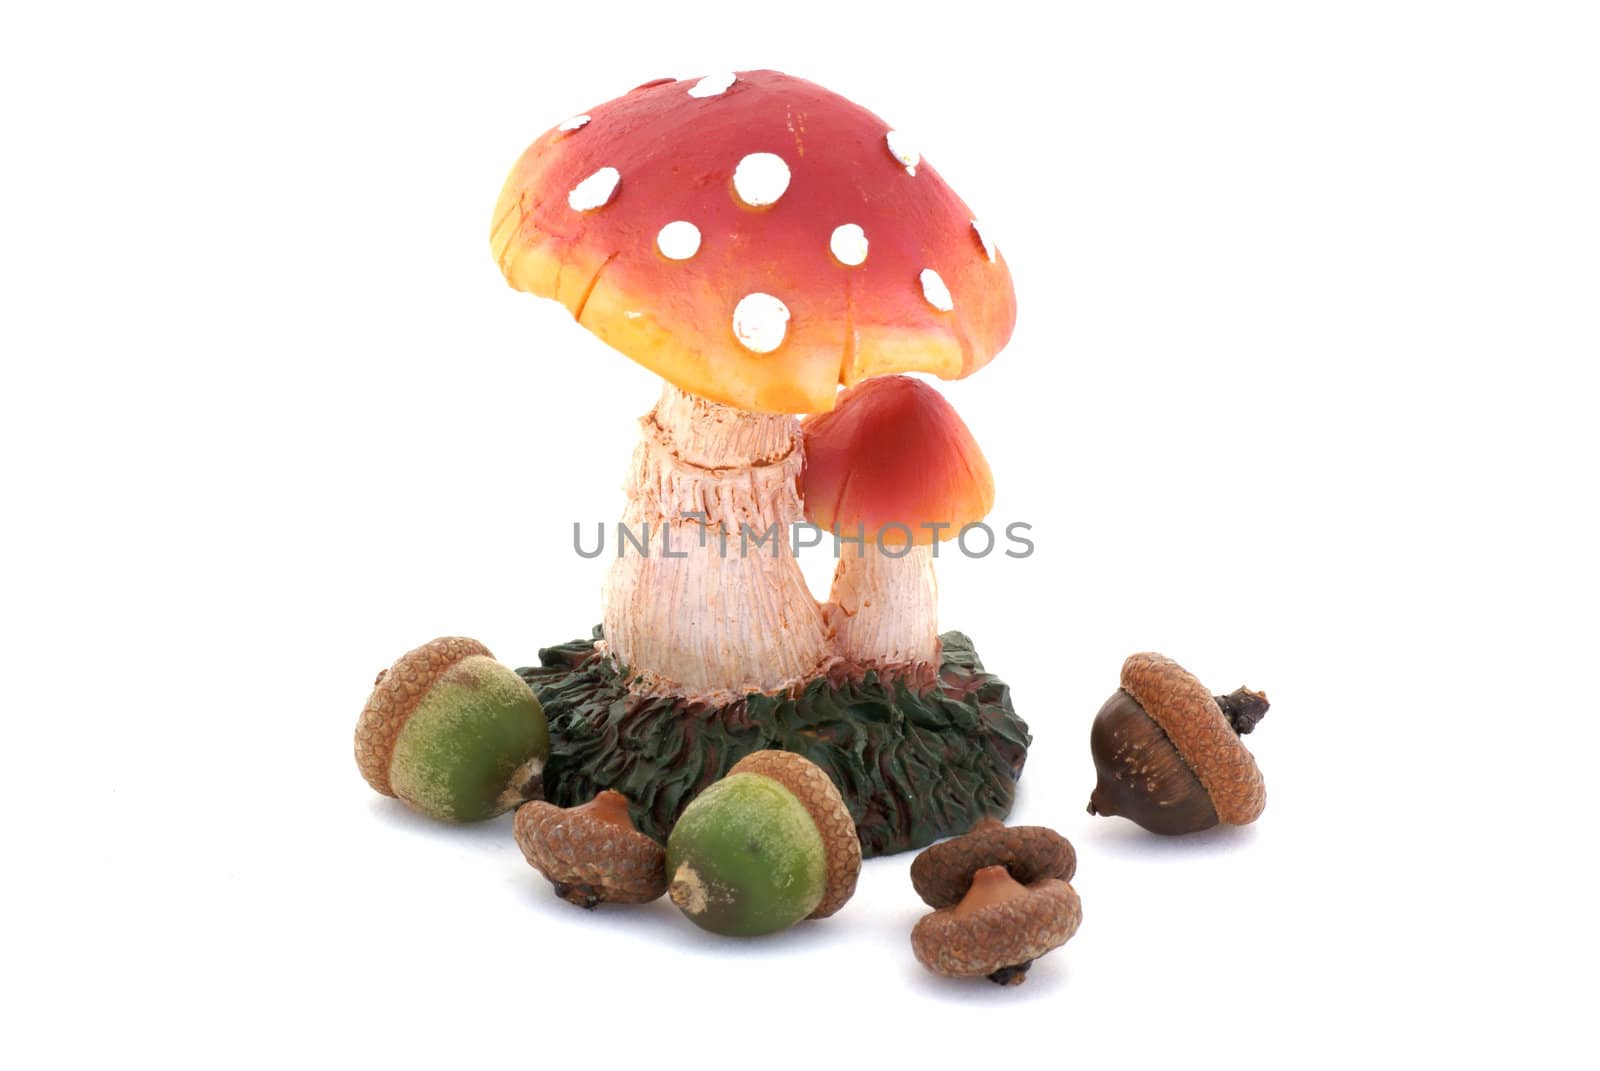 Acorns and a toadstool. by SasPartout